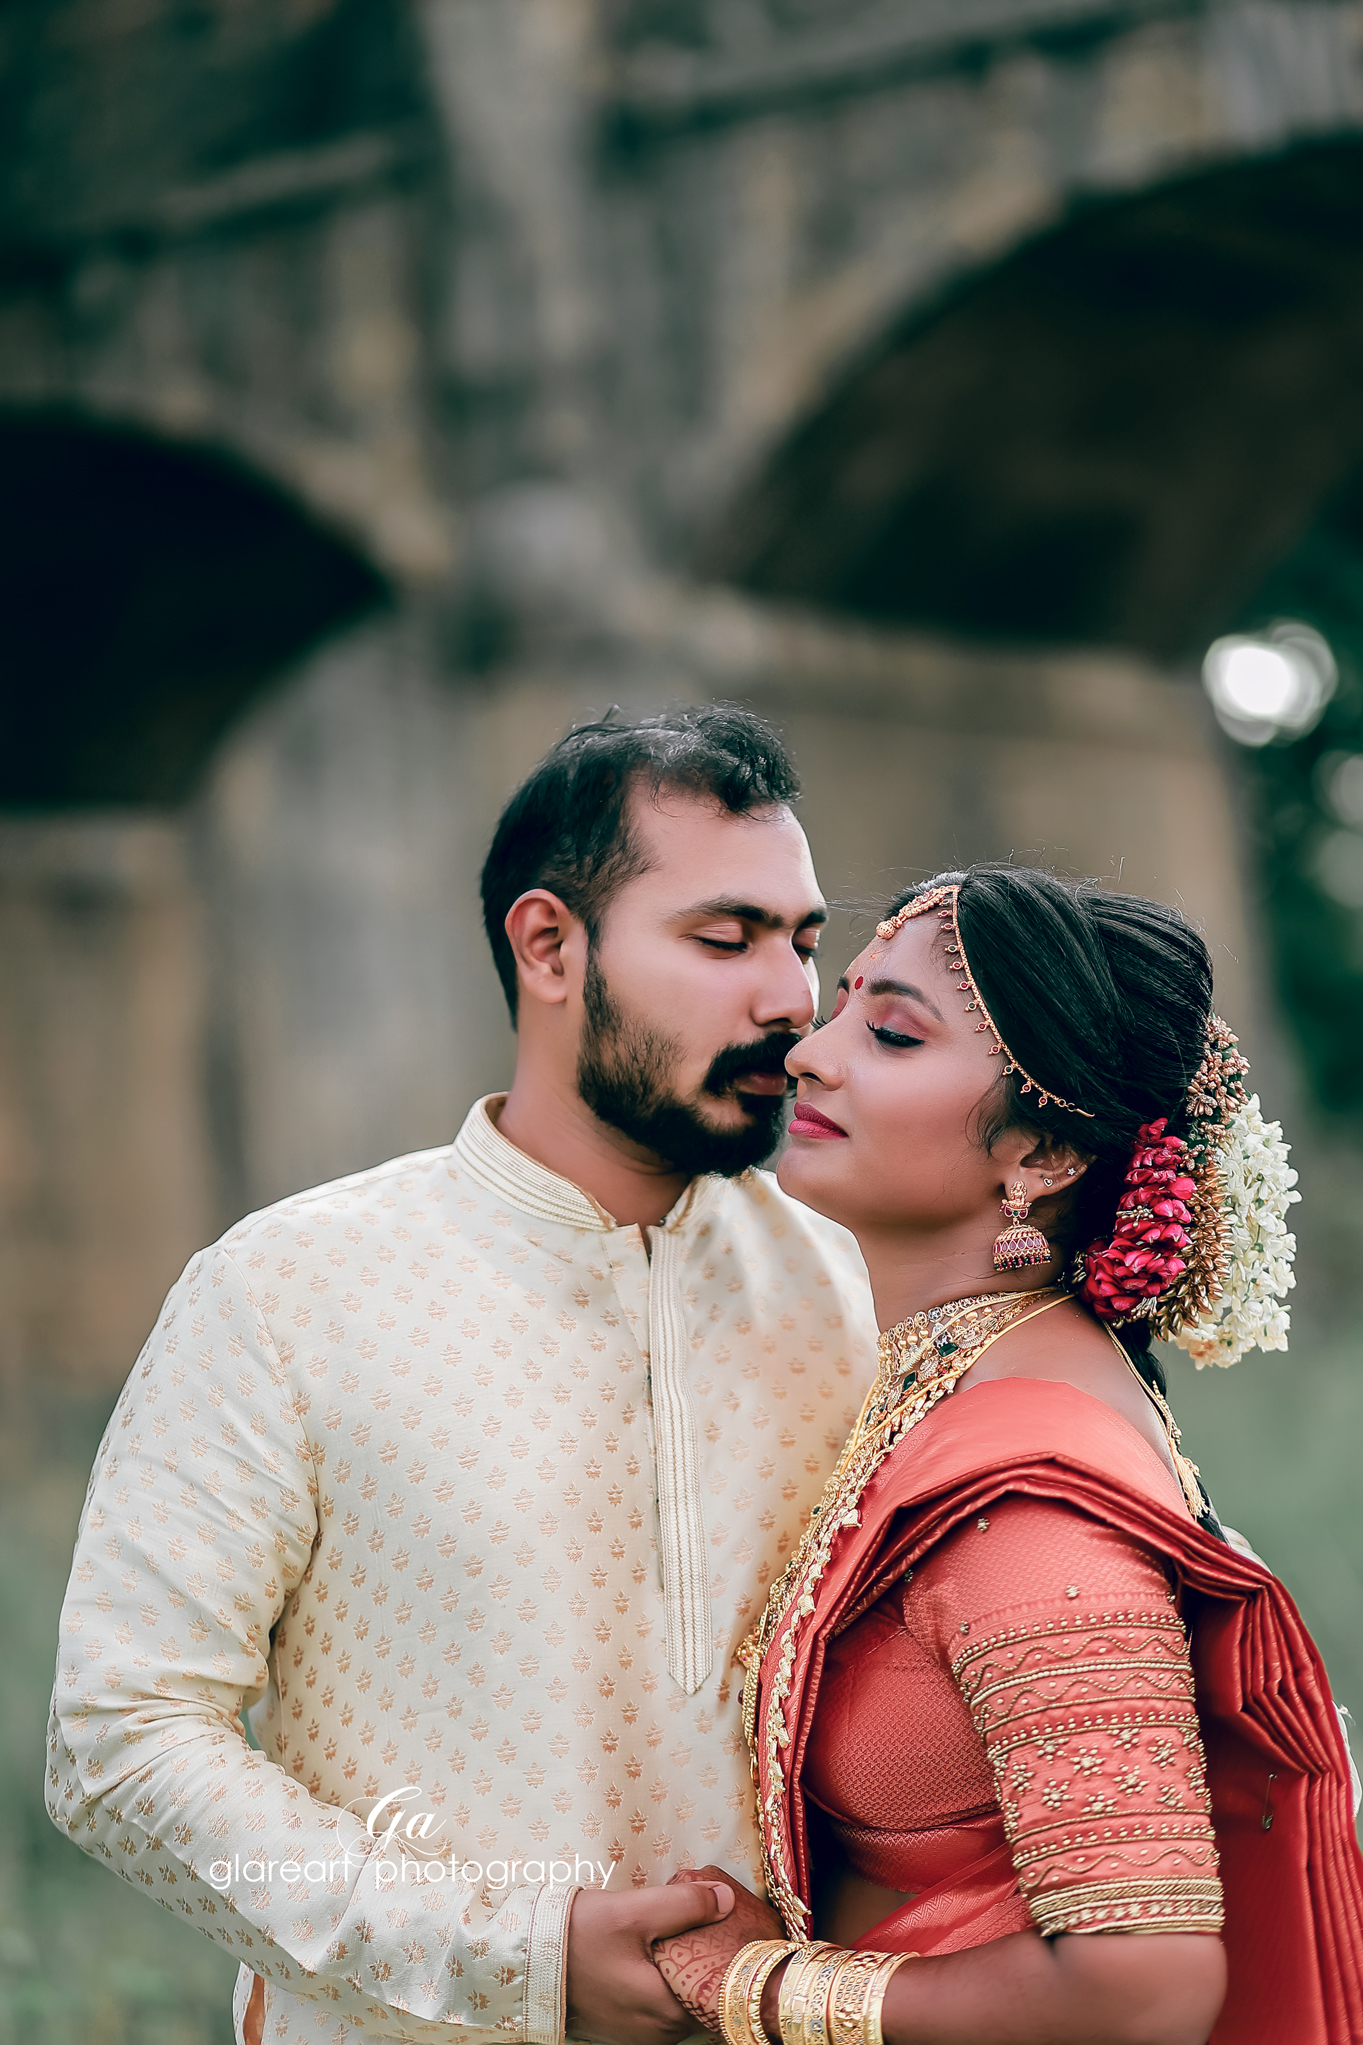 Wedding Photography in Kerala | Wedding Photography in Trivandrum - Green  Water Events